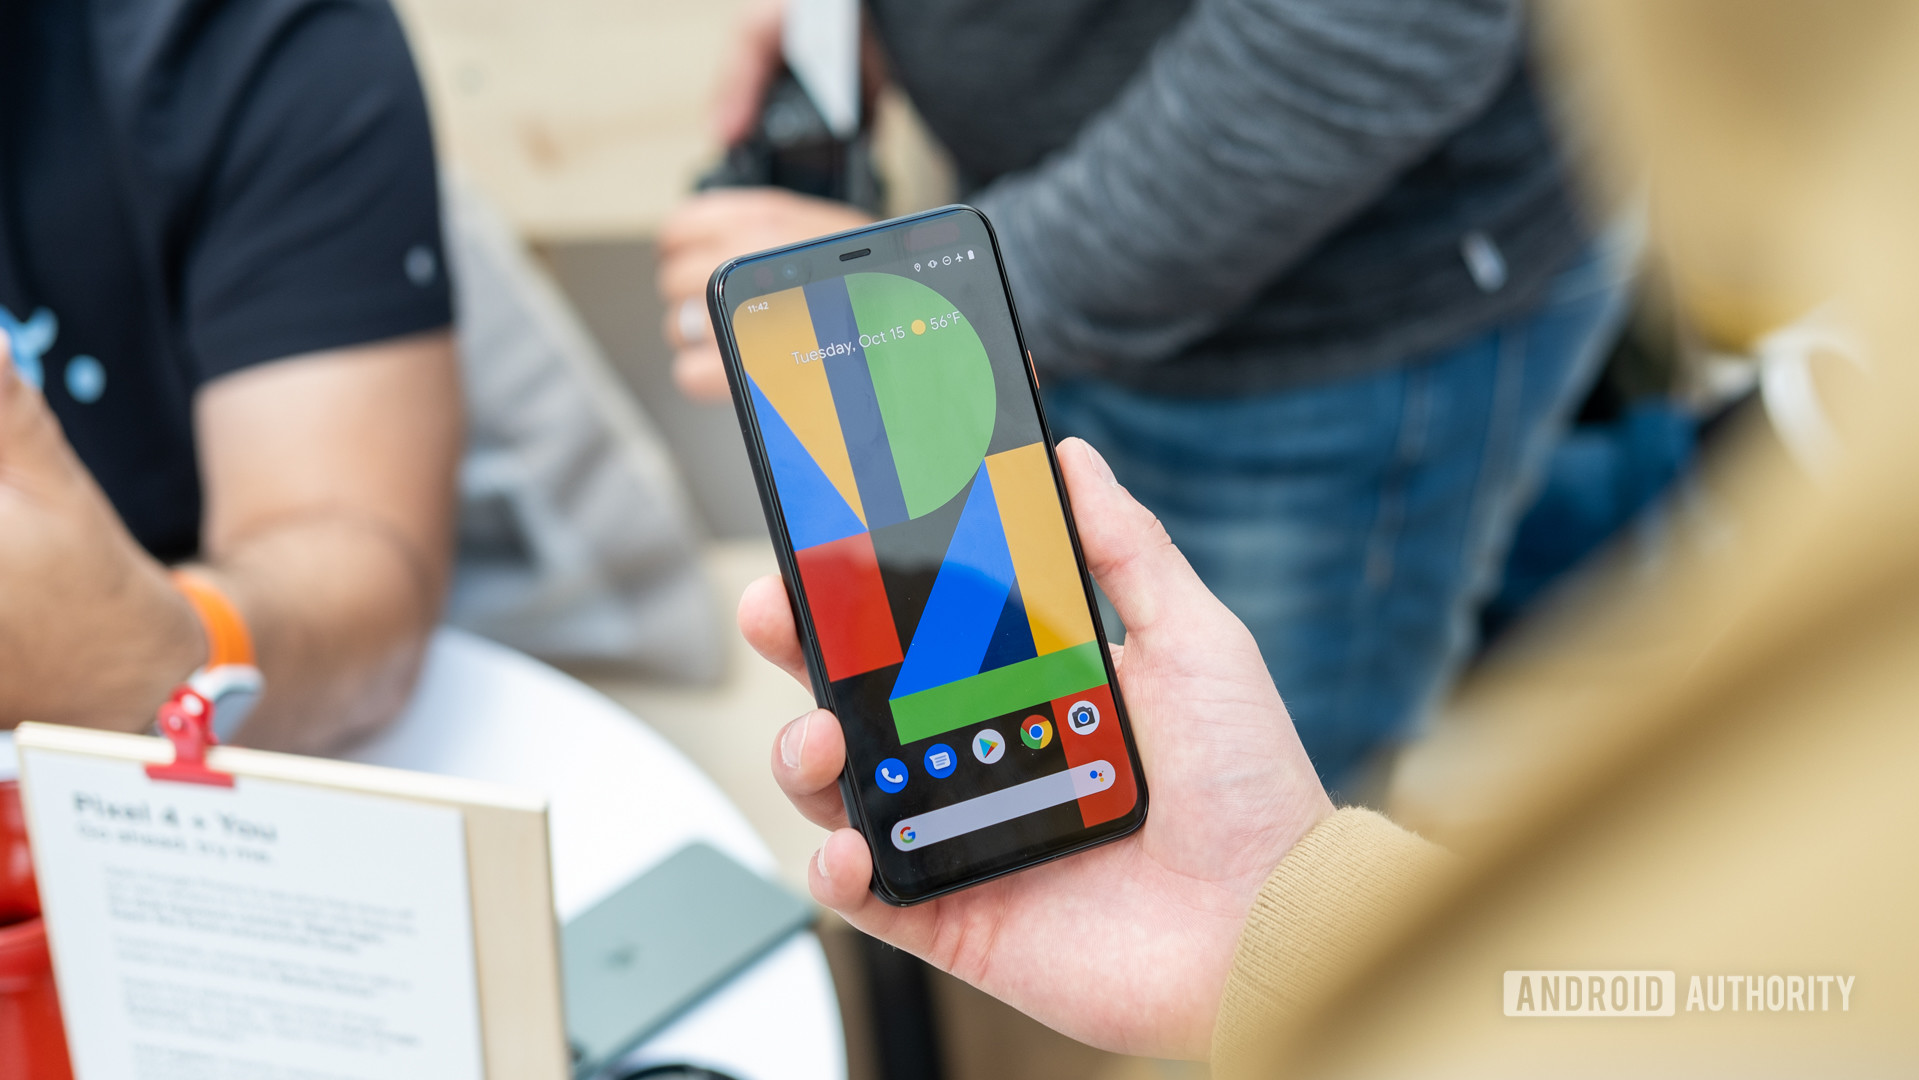 A hack brings the Pixel 4 face unlock to unsupported apps.